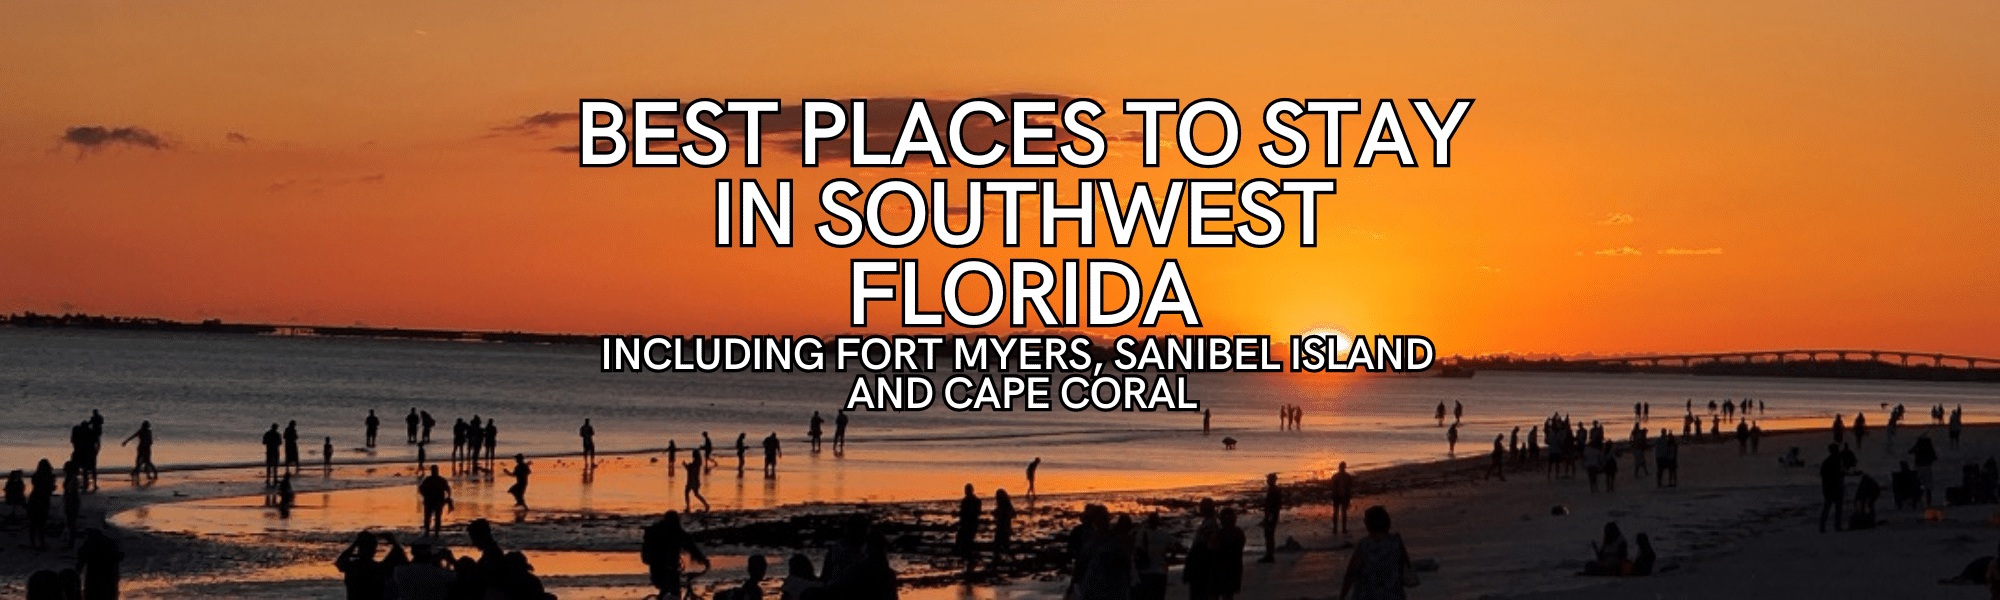 Best Places To Stay In Southwest Florida